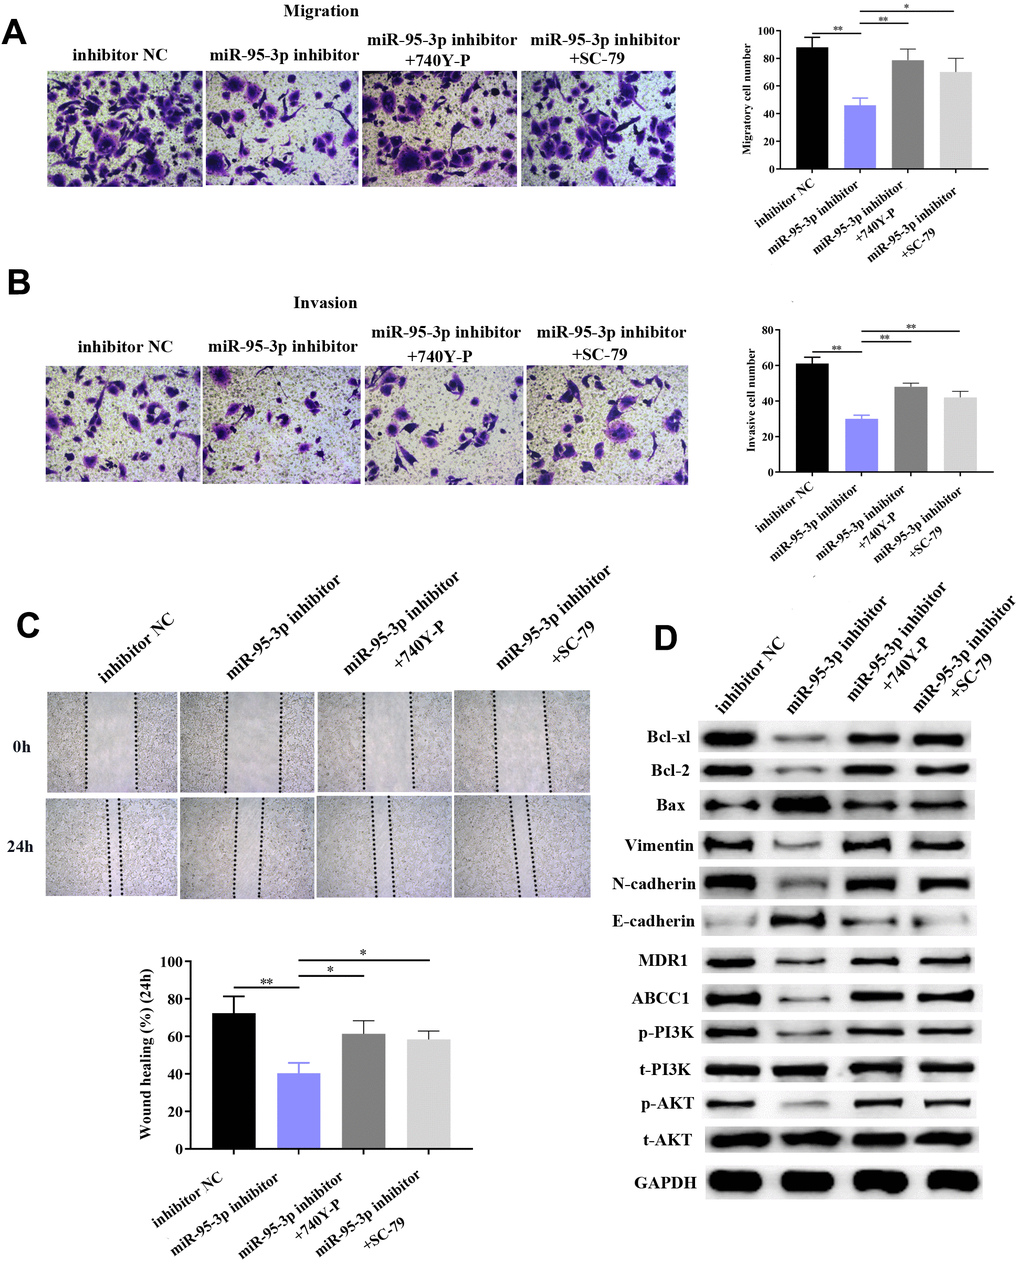 Activation of the PI3K/AKT pathway impaired DDP sensitivity among GC cells. (A) Activation of the PI3K/AKT pathway does not affect expression of EMP1. (B) Use of PI3K/AKT activation impaired GC cells’ sensitivity toward DDP compared to the miR-95-3p inhibitor treated group. (C) Result from the BrdU assay further indicated that PI3K/AKT activator significantly enhanced DDP-resistant cell survival rate compared to the miR-95-3p inhibitor-treated group. (D) Results from flow cytometry demonstrated that PI3K/AKT activator could conspicuously decrease cellular apoptosis rate compared to the miR-95-3p inhibitor treated group. ***p